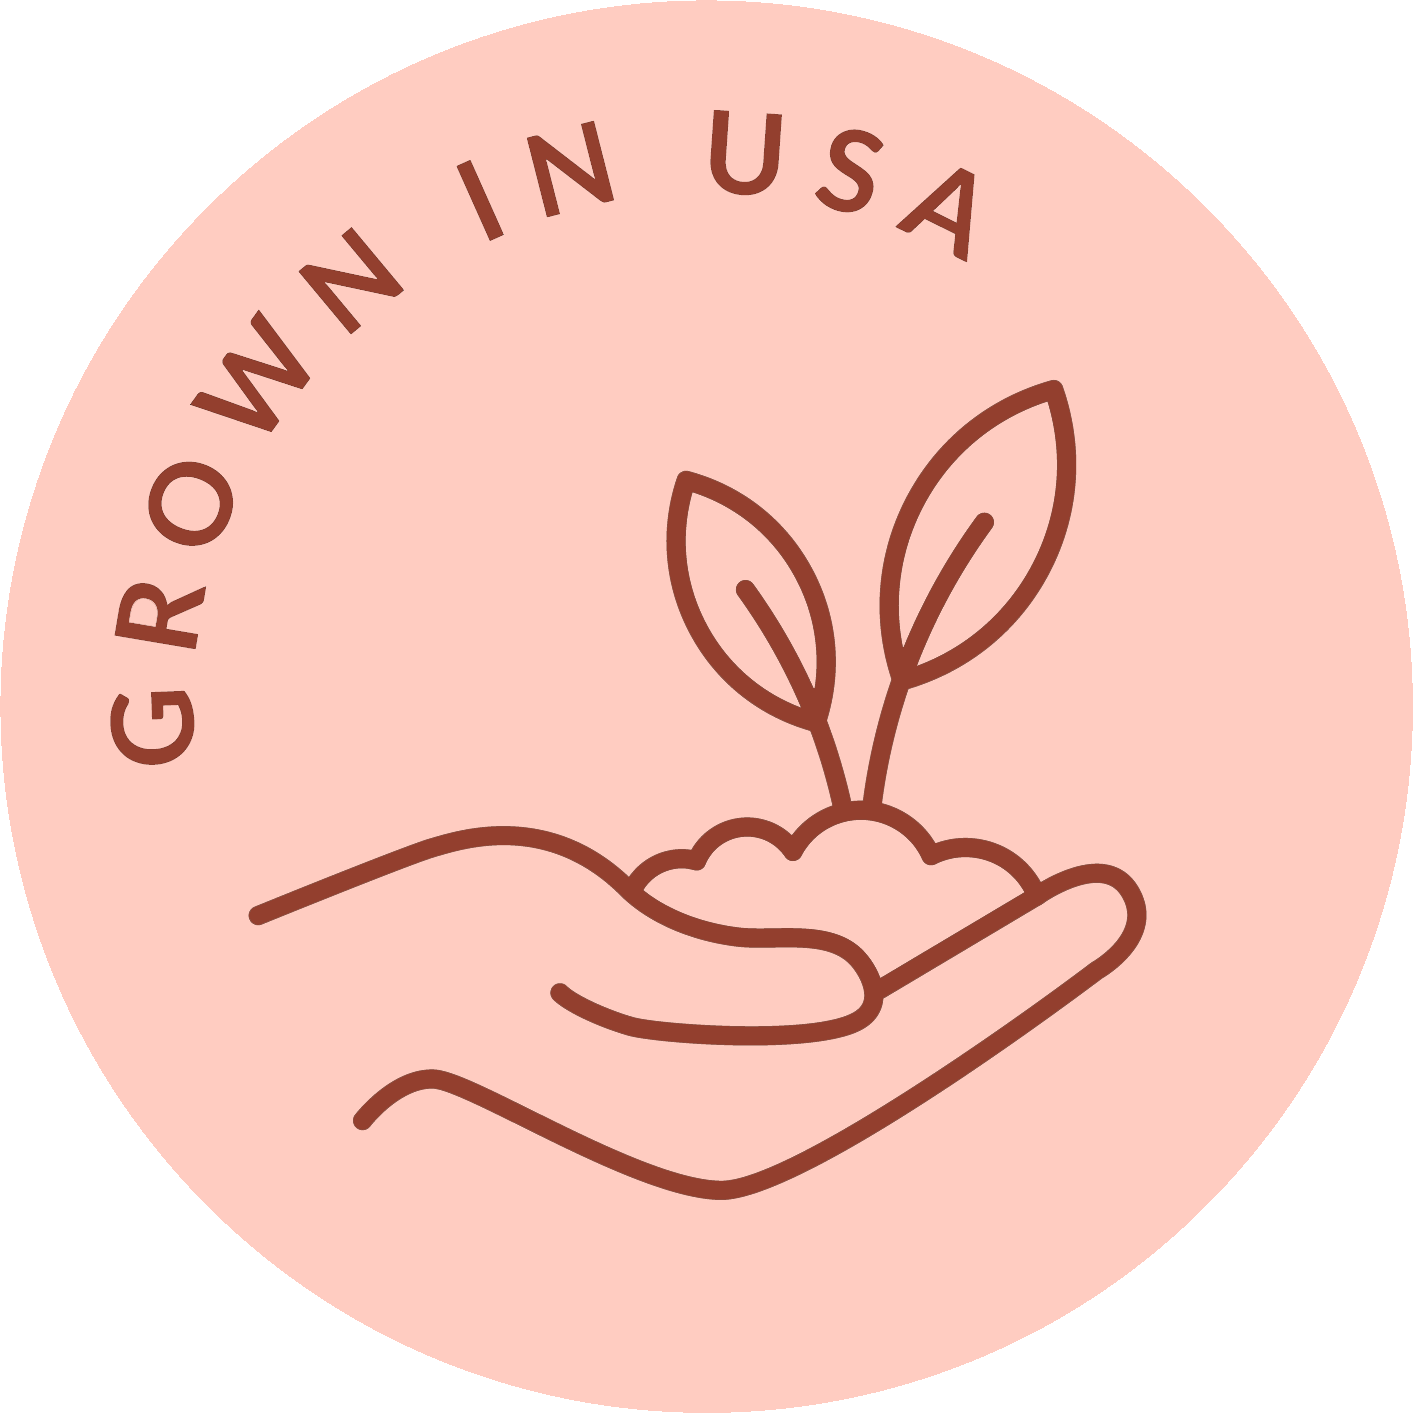 Grown in USA logo with a map of the USA icon